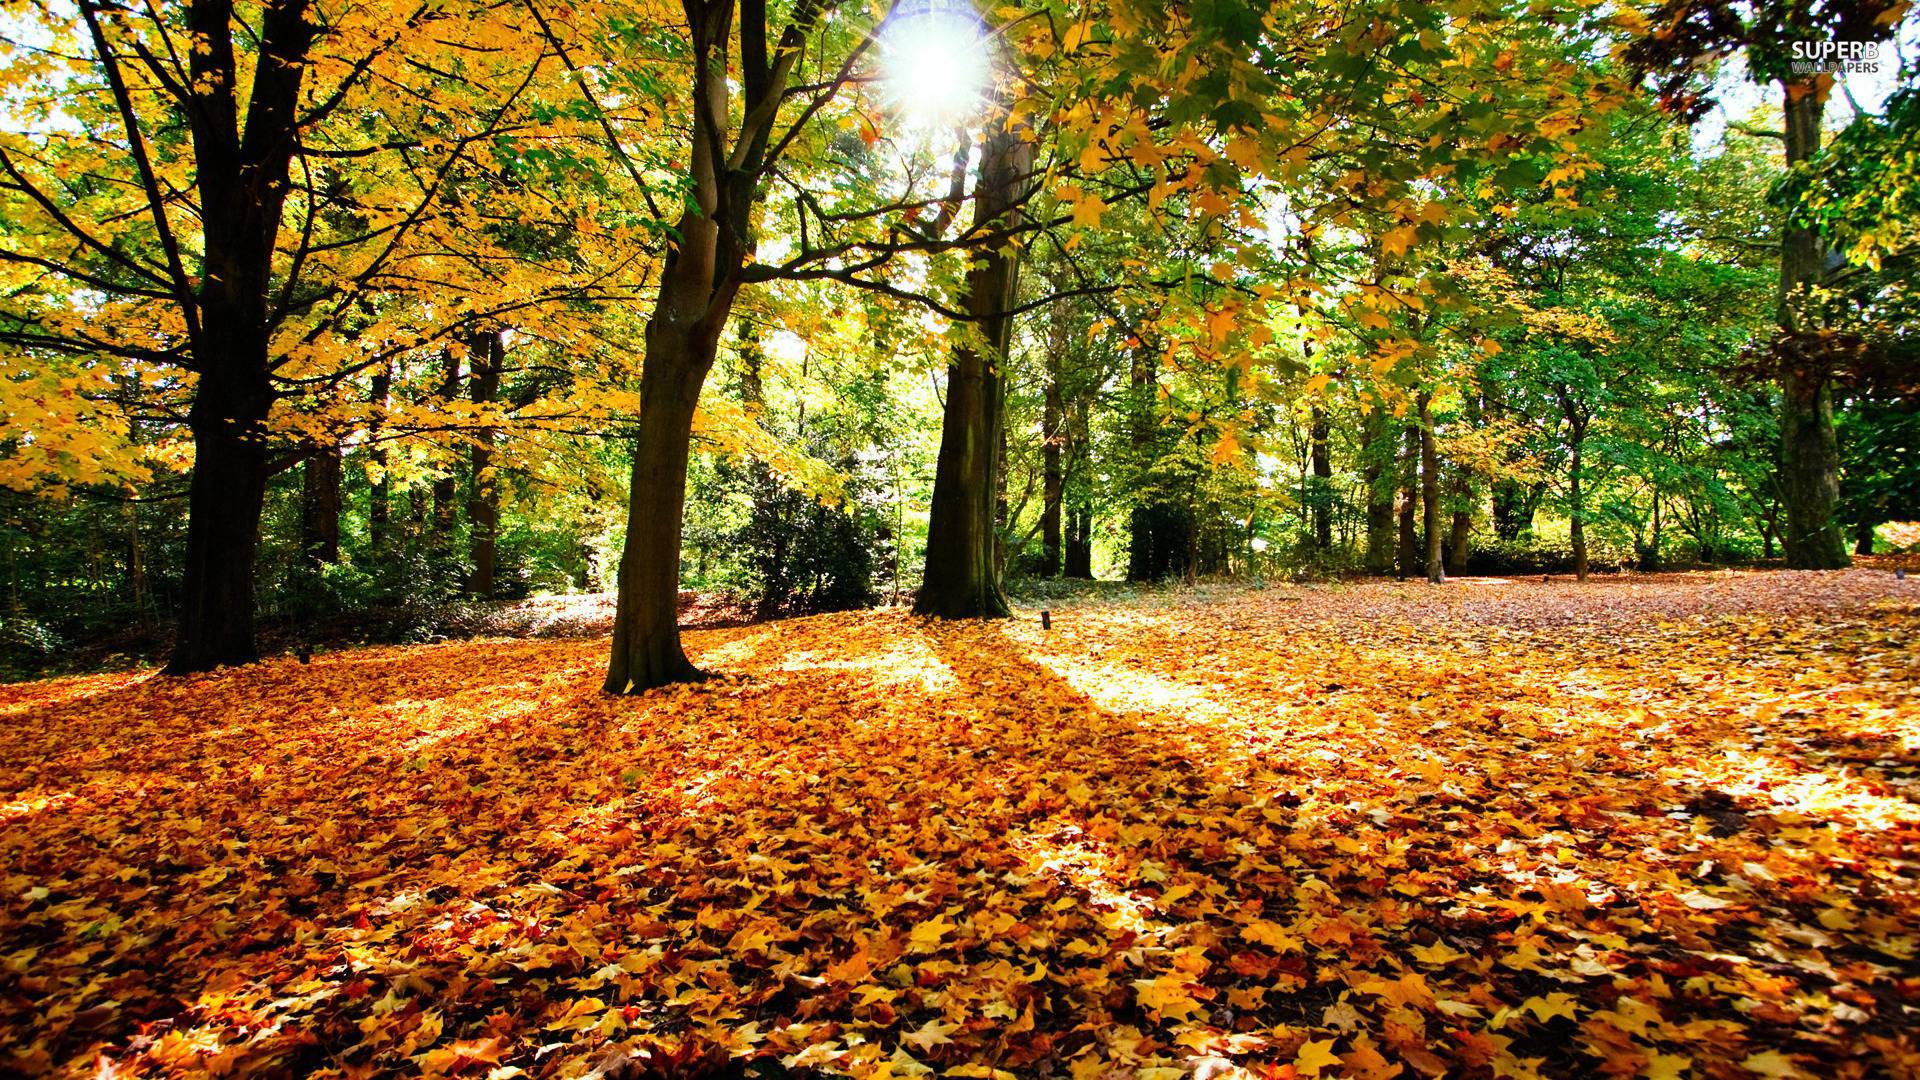 Autumn in the forest wallpaper wallpaper - #